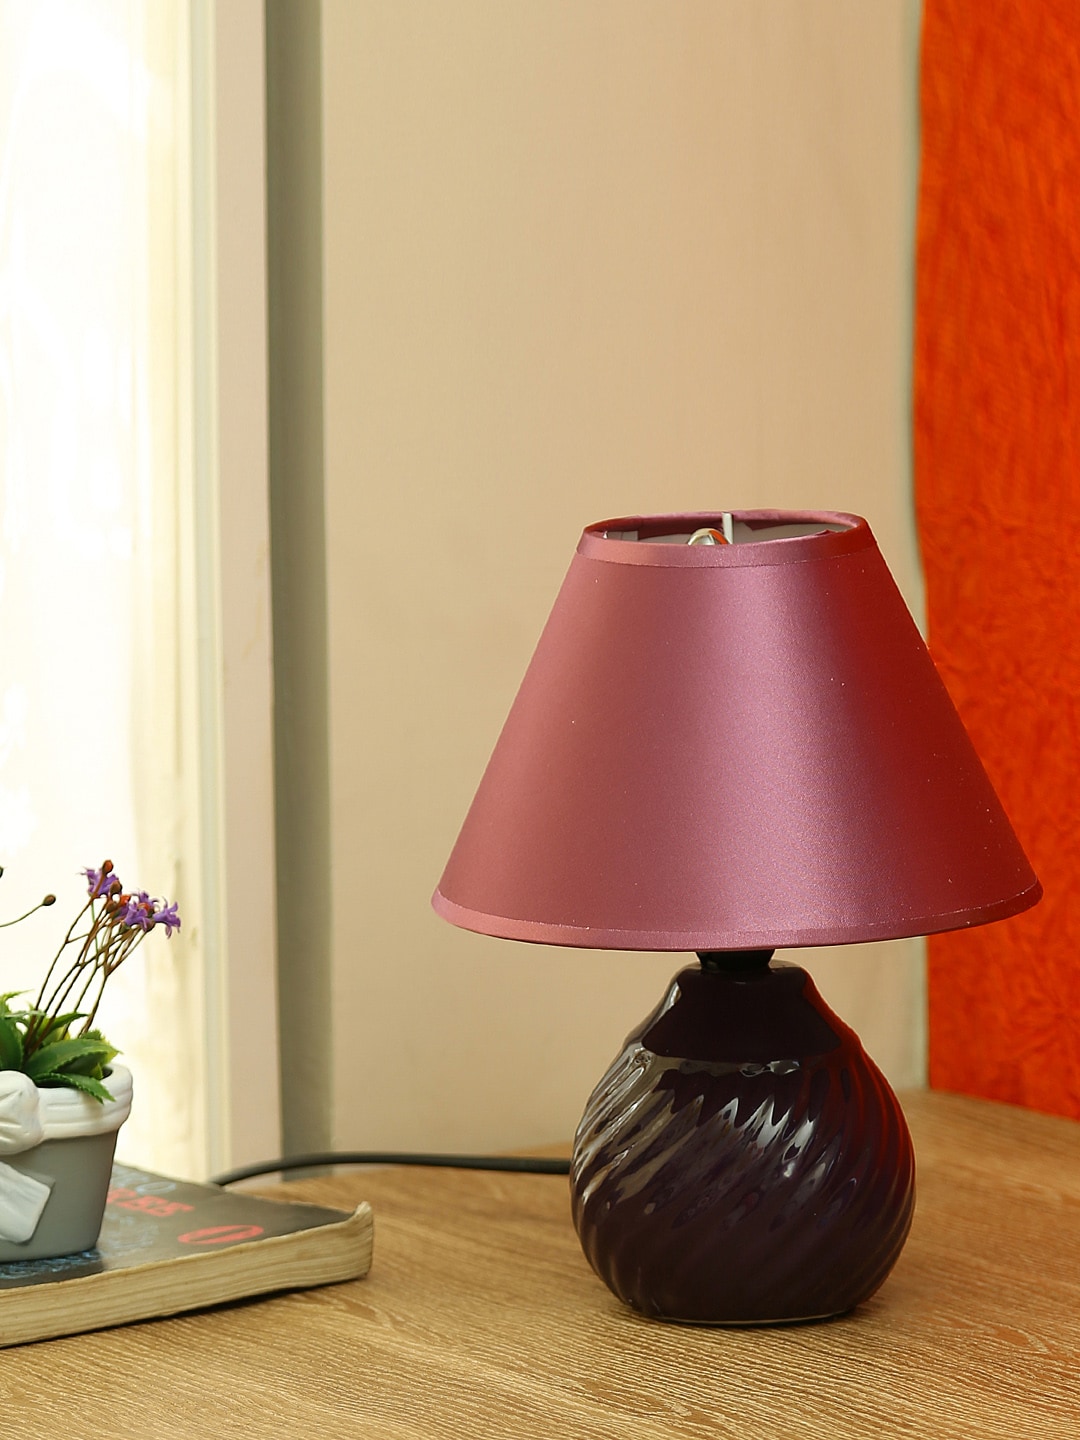 Aapno Rajasthan Purple Vintage Style Polished Ceramic Round Table Lamp With Shade Price in India